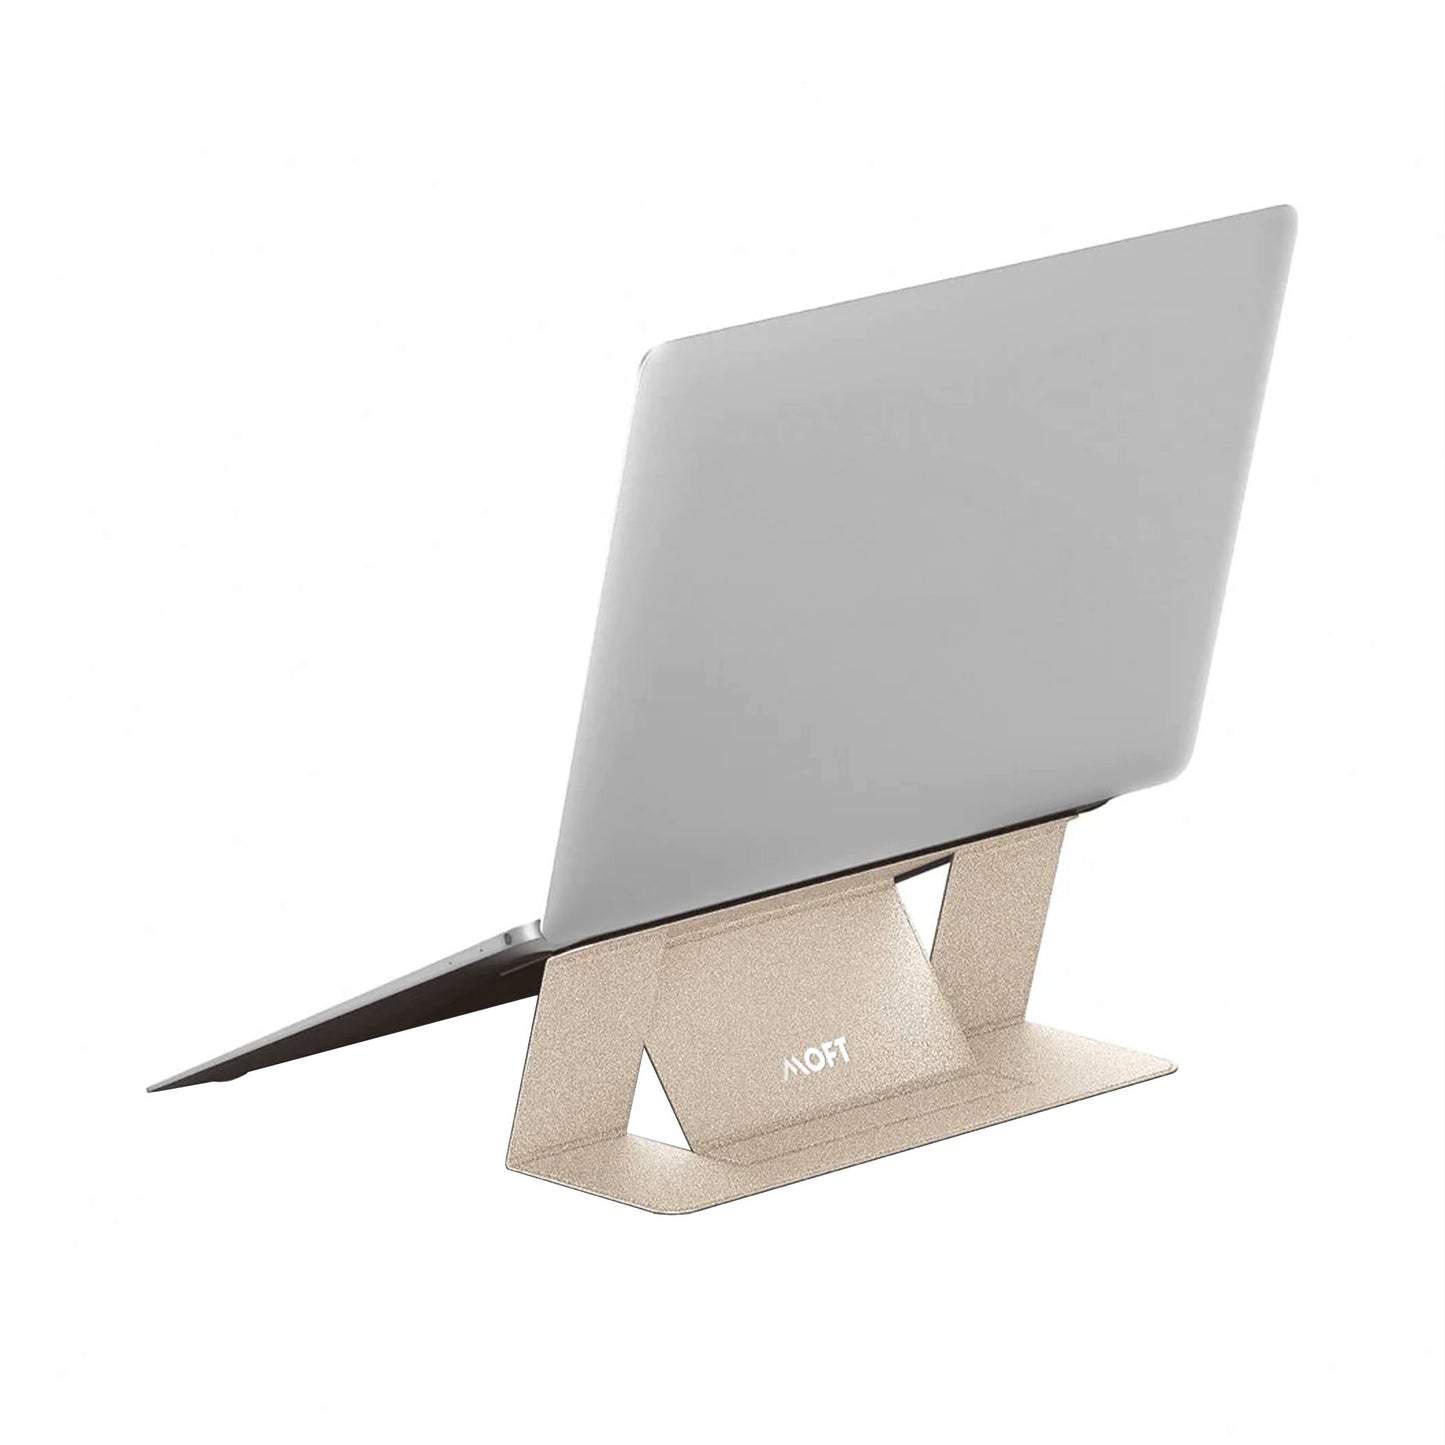 MOFT Air-Flow Foldable Laptop Stand - Gold